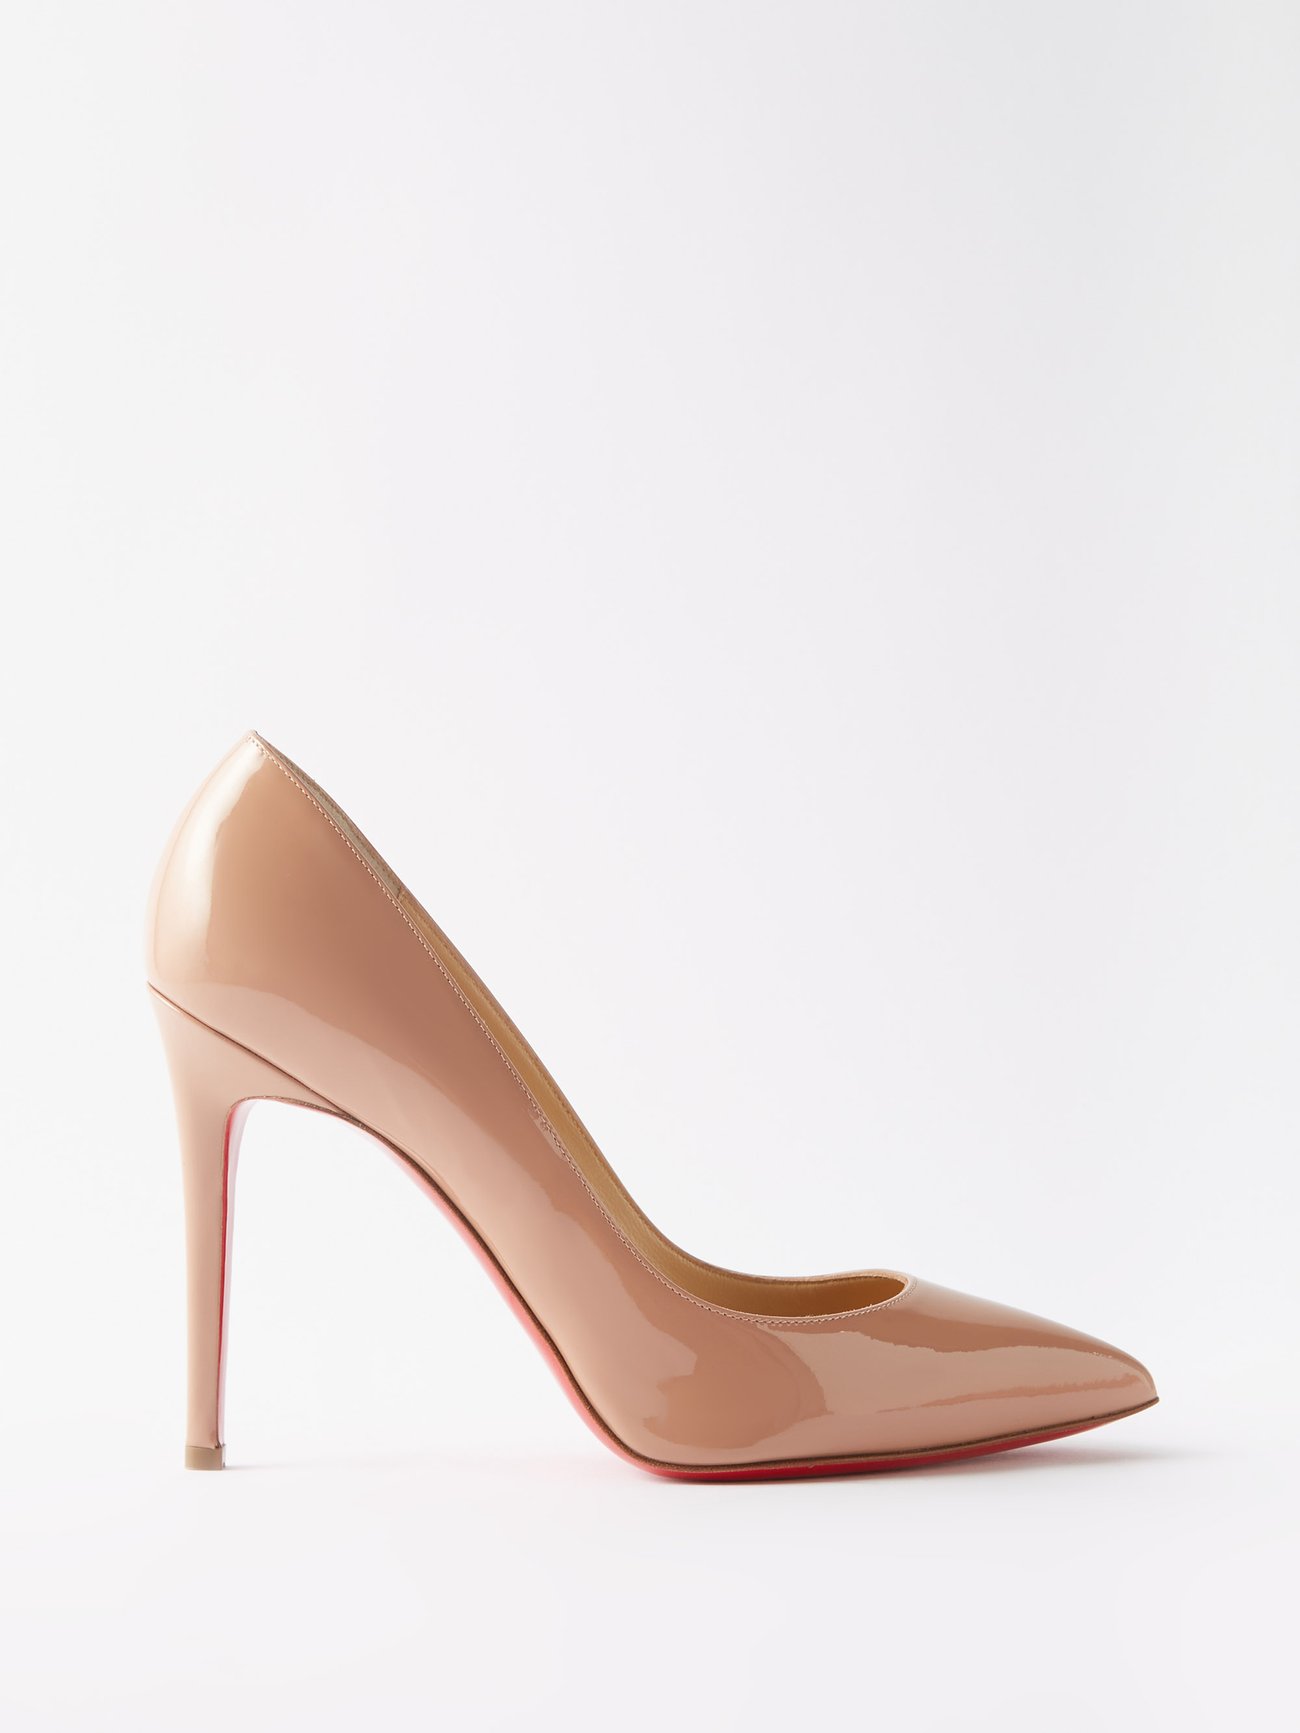 Christian Louboutin Beige Patent Leather Simple 100 Pumps Size 6.5/37